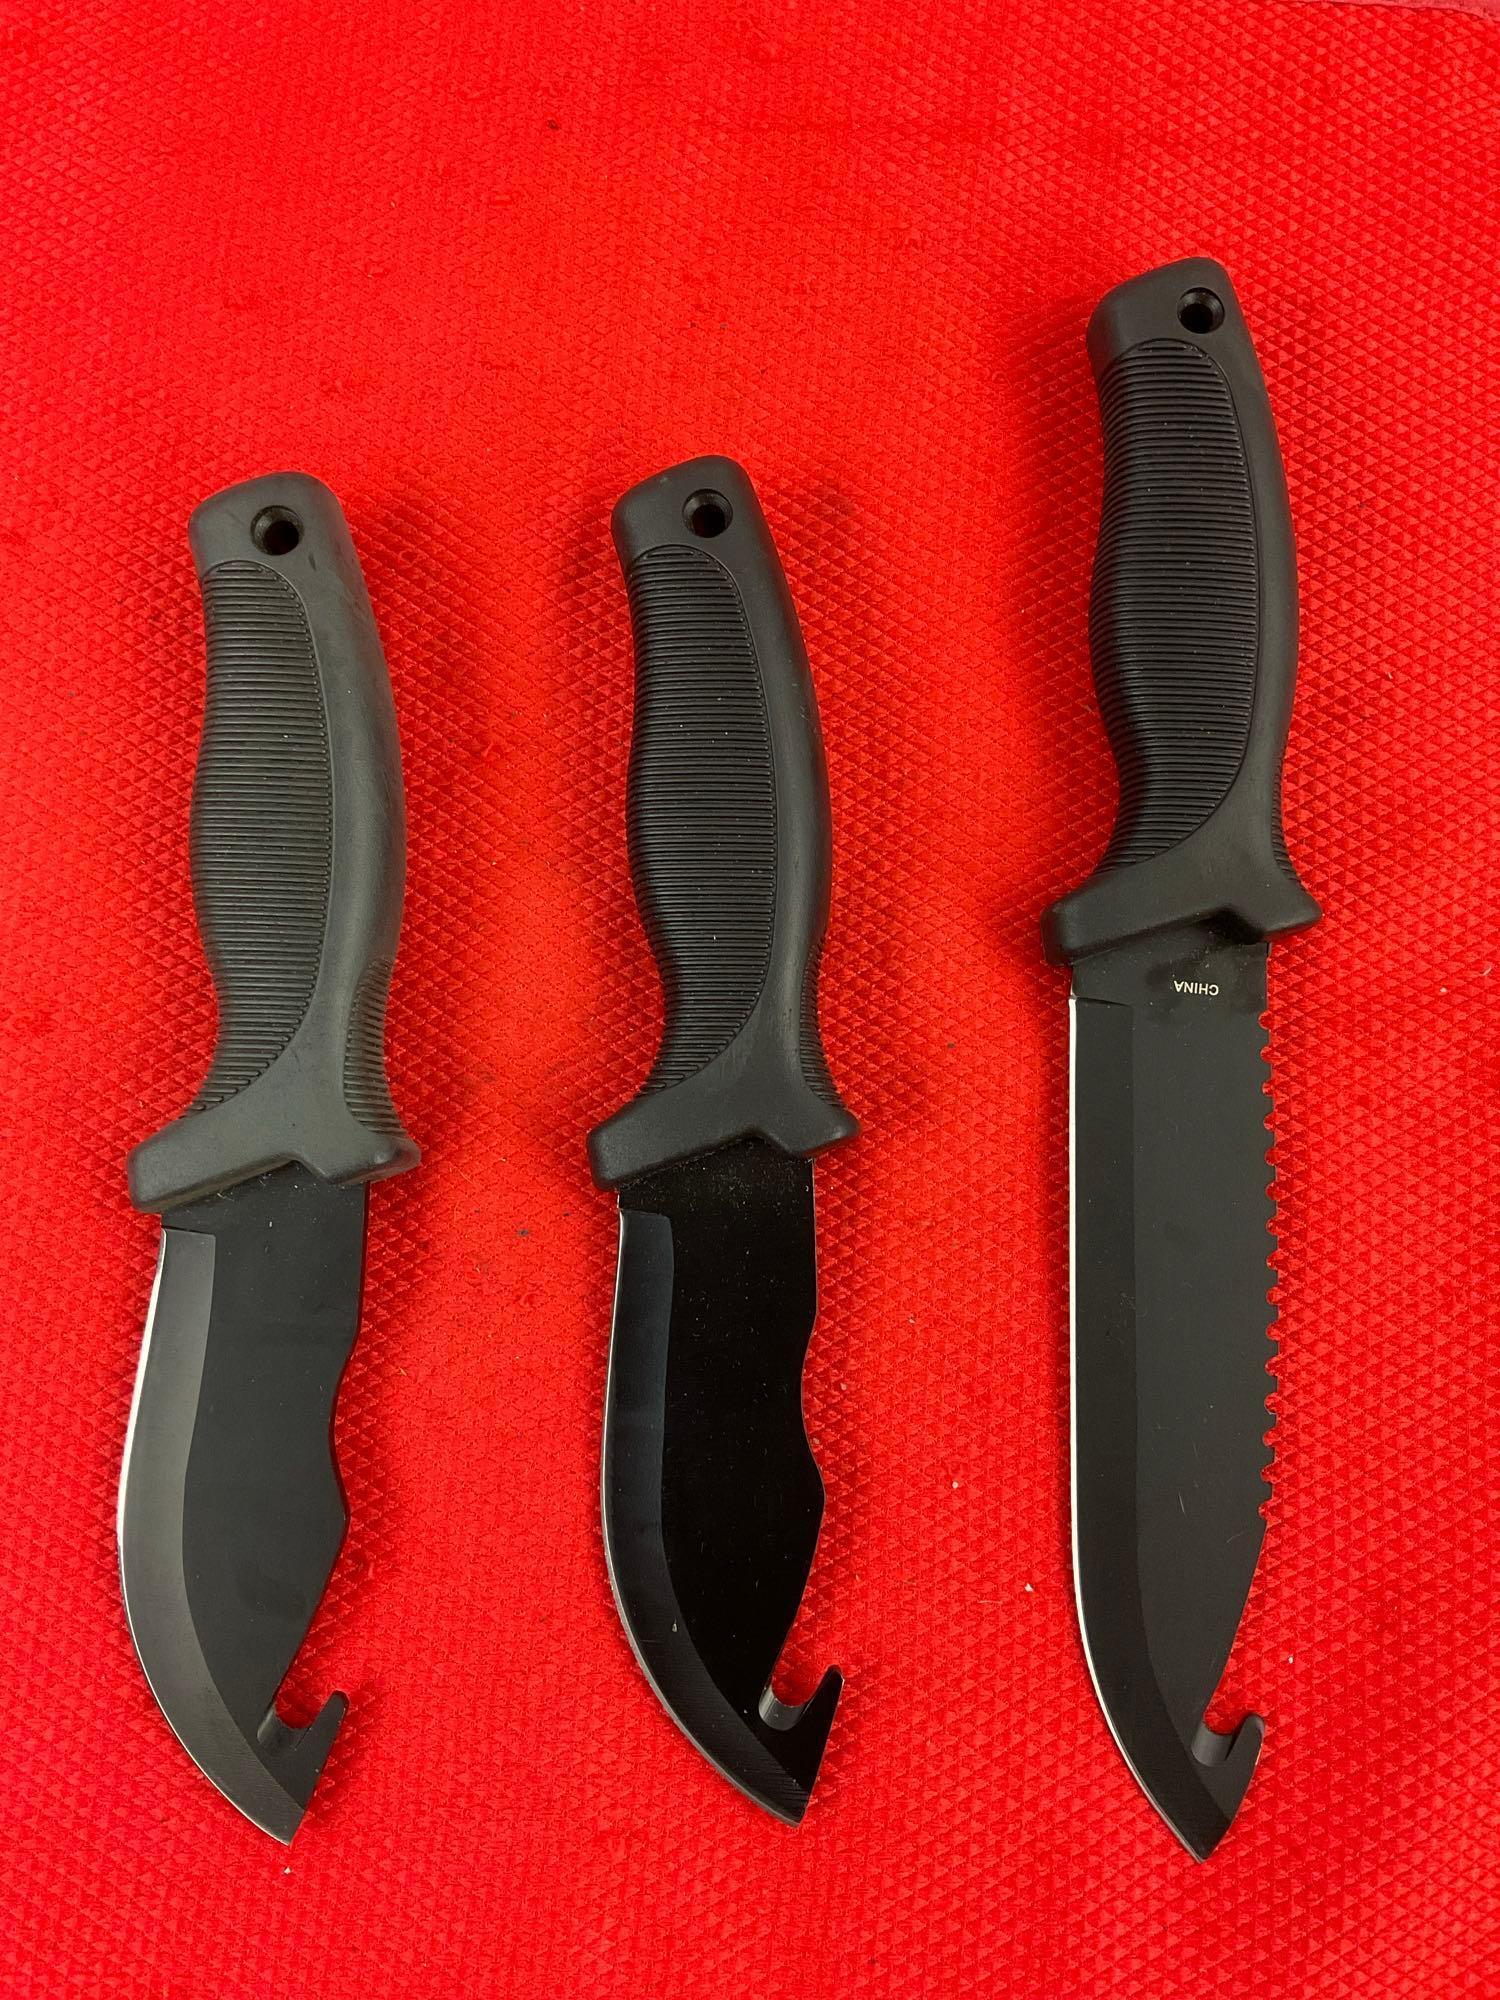 3 pcs WatchFire Steel Fixed Blade Hunting Knives w/ Sheathes. 2x 210922. 1x 210920. See pics.